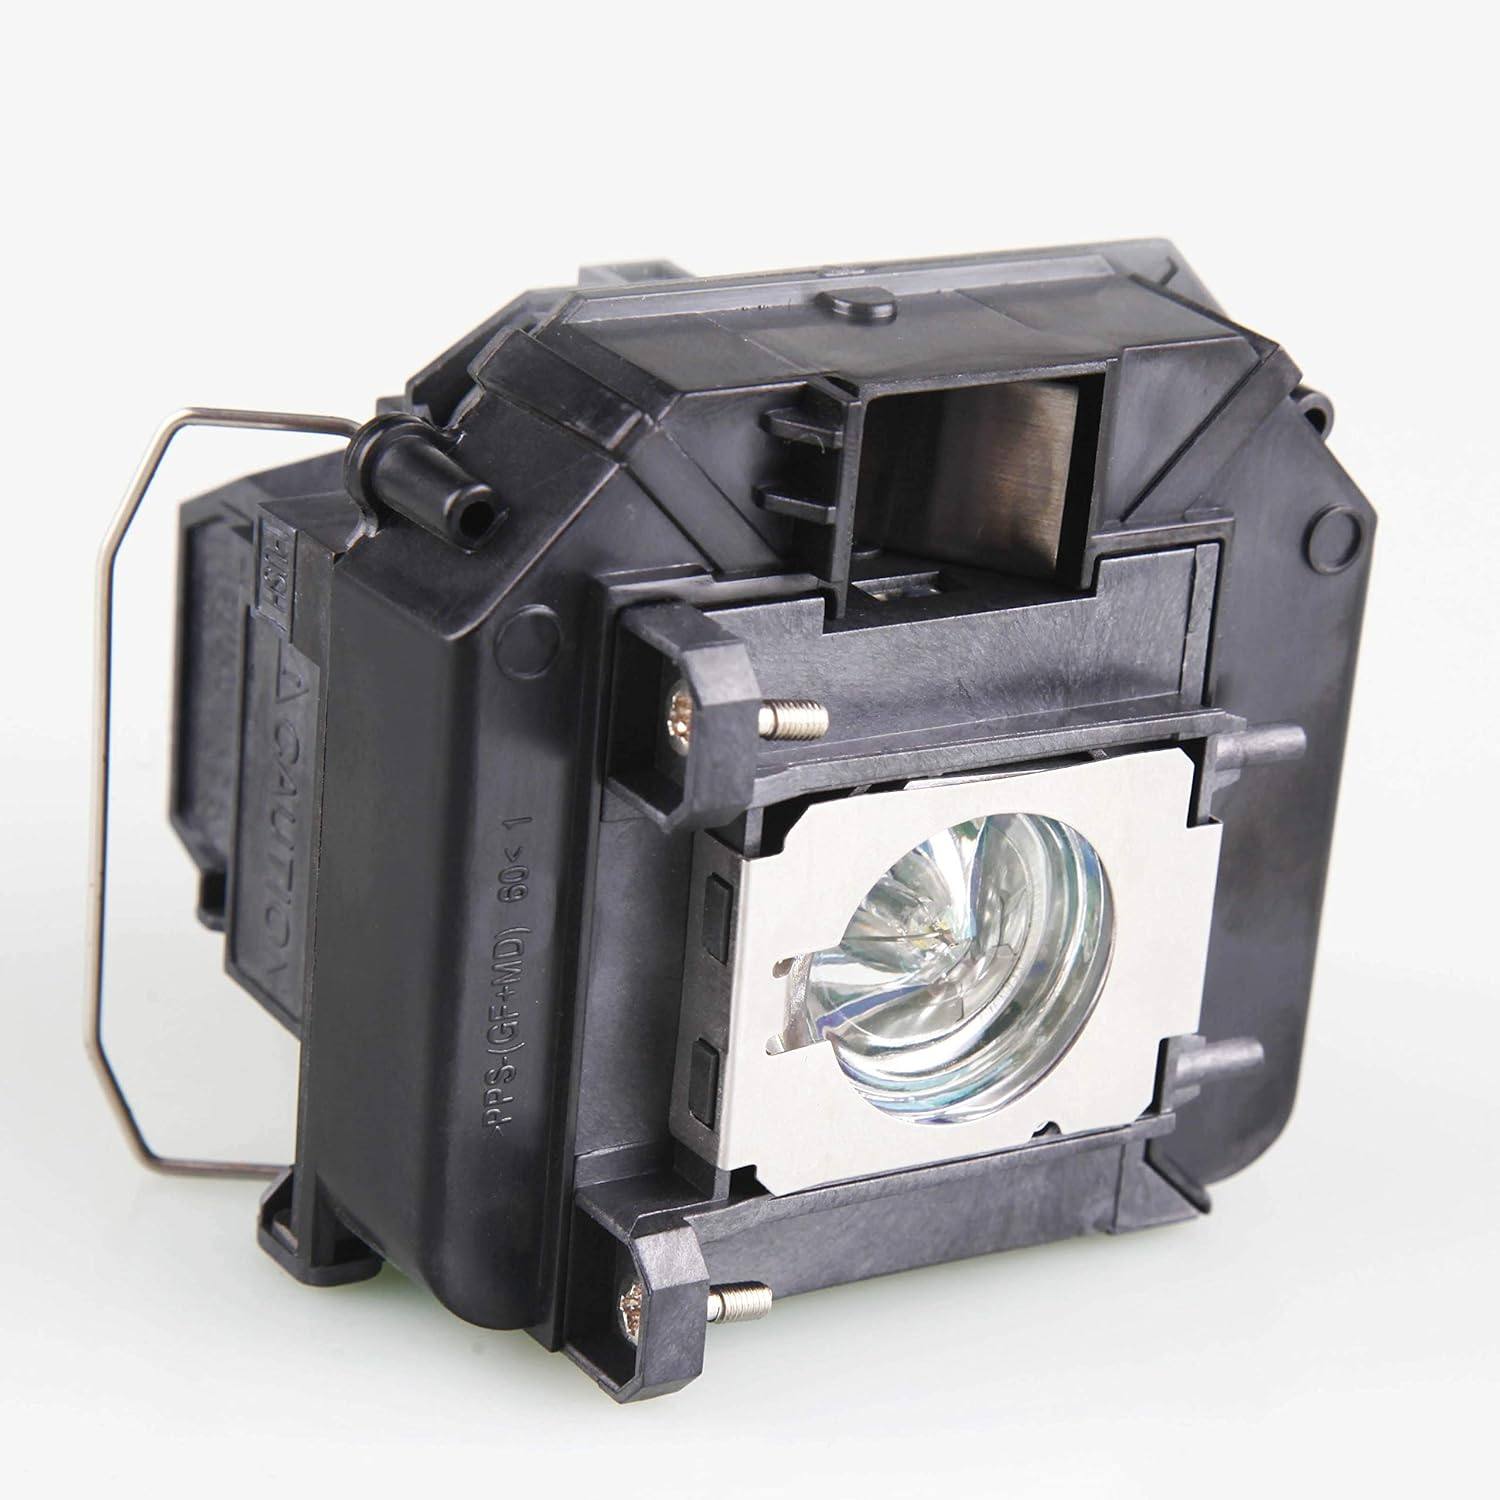 Replacement Projector lamp ELPLP61 For EPSON EB-430/EB-430LW/EB-4311